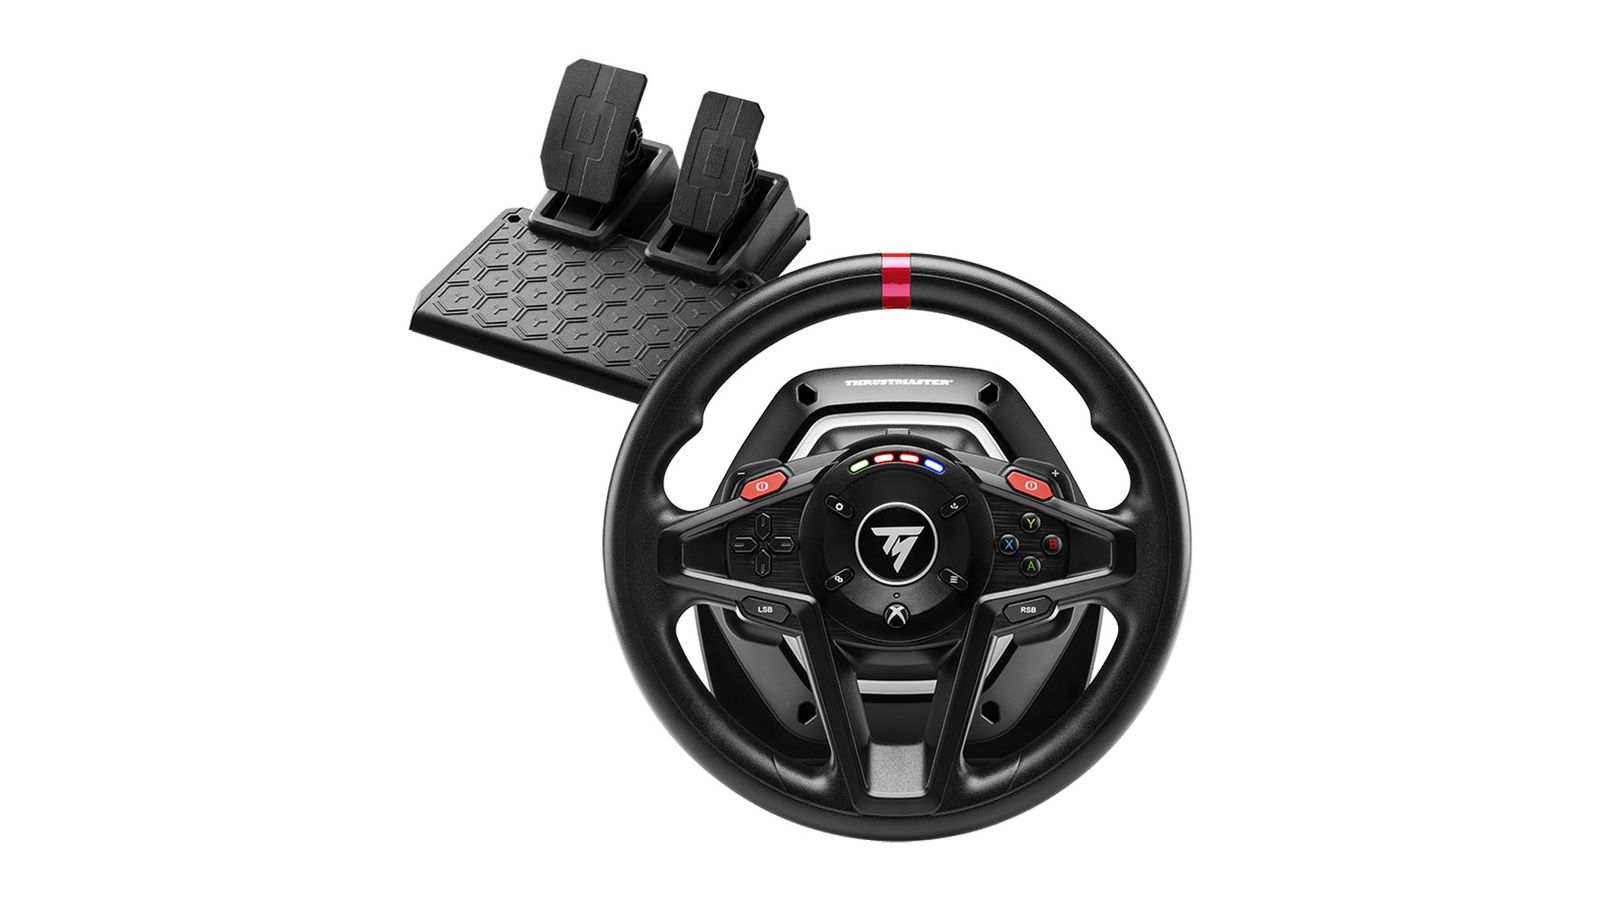 Thrustmaster T248 product image of a black racing wheel and pedal set with a red centre line.